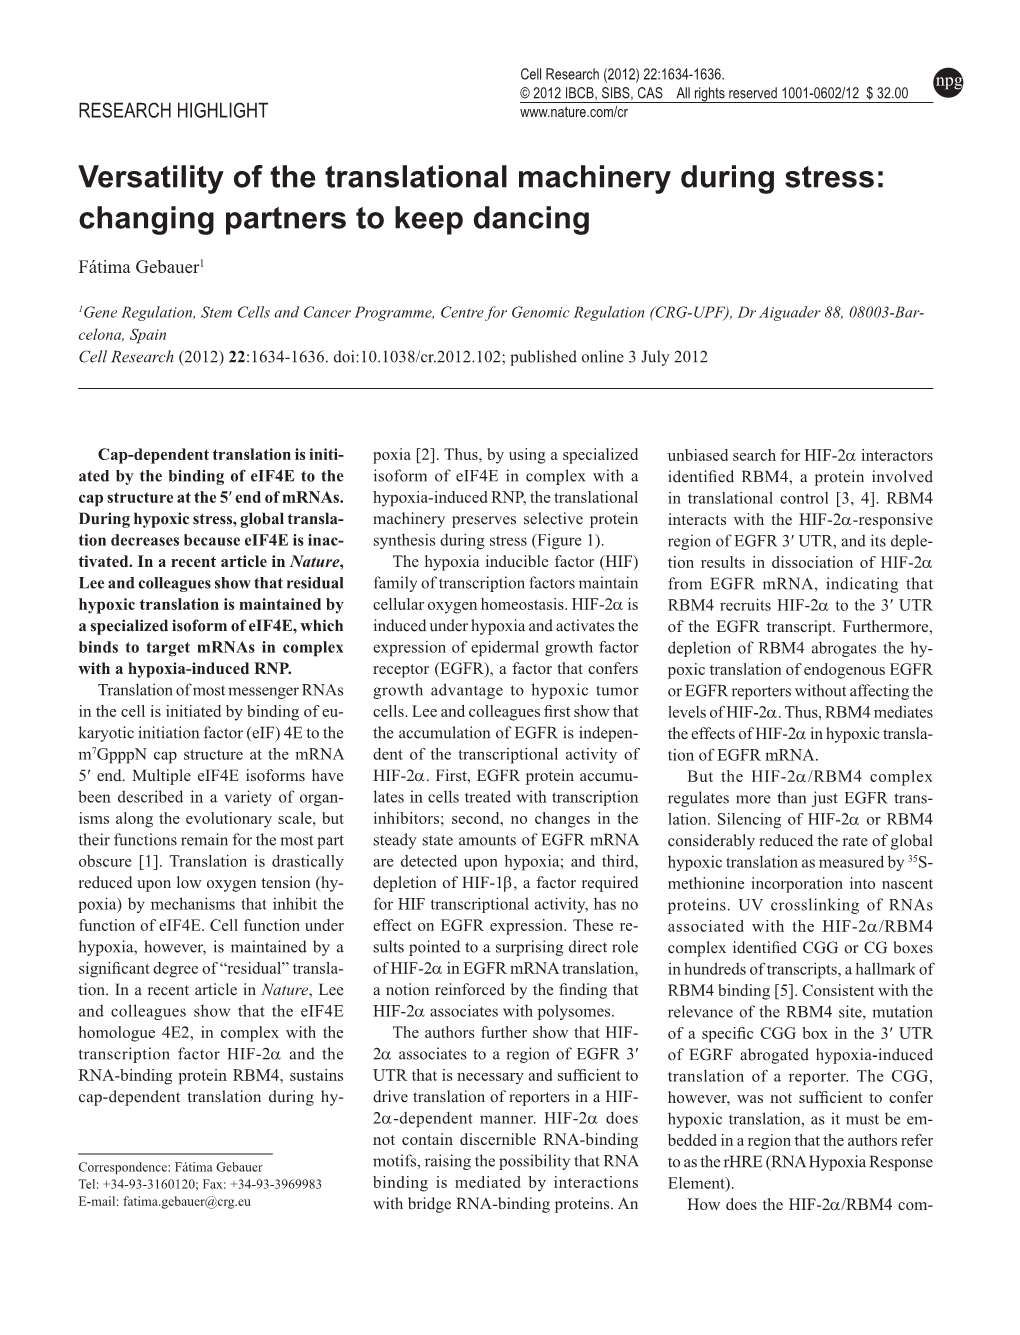 Versatility of the Translational Machinery During Stress: Changing Partners to Keep Dancing